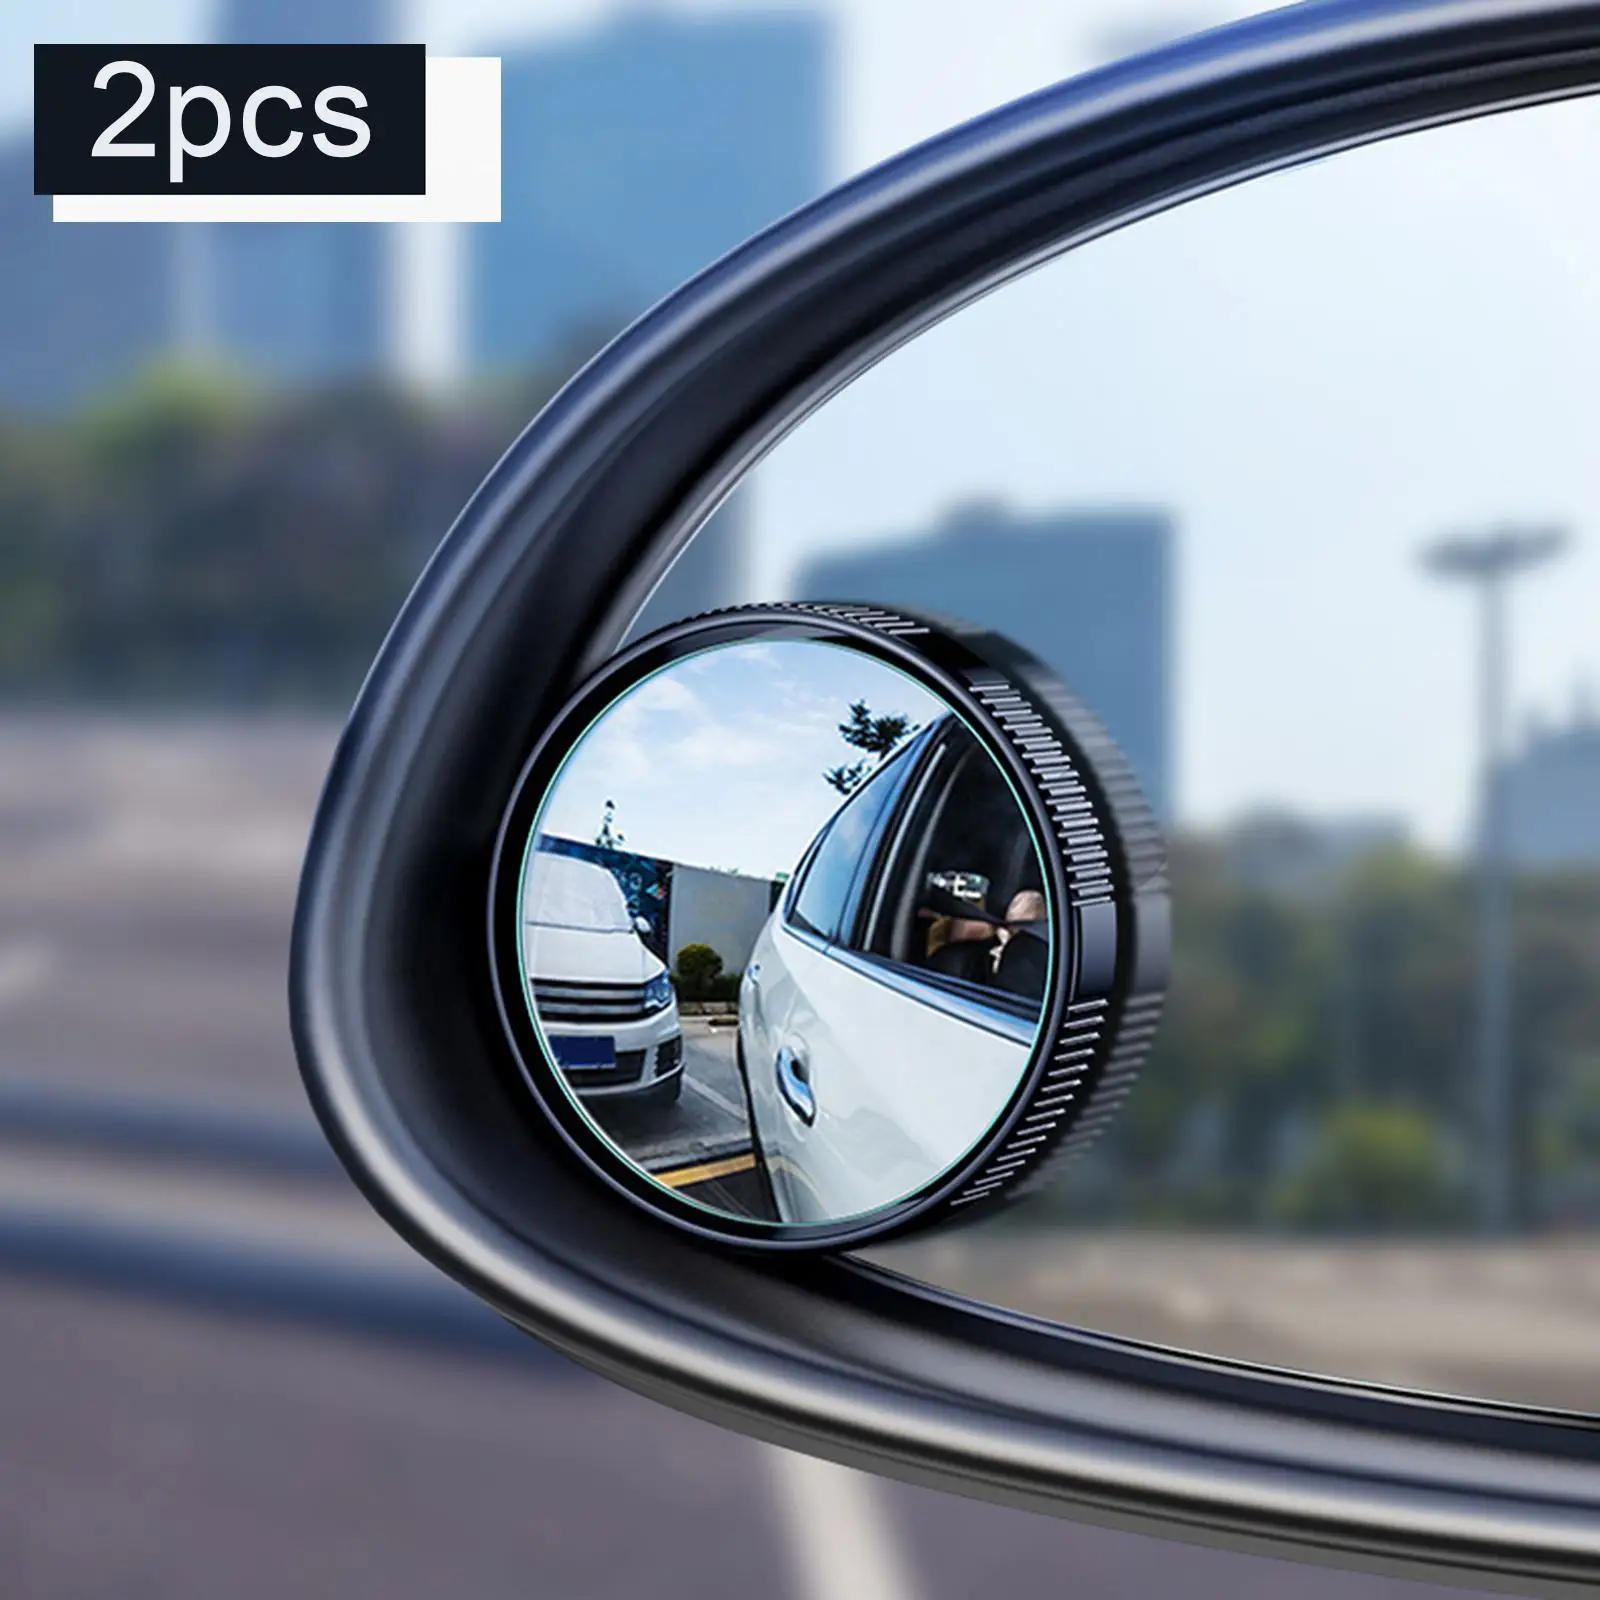 2Pcs Blind Spot Mirrors, Side Rearview 60 Wide Angle HD Glass for Cars